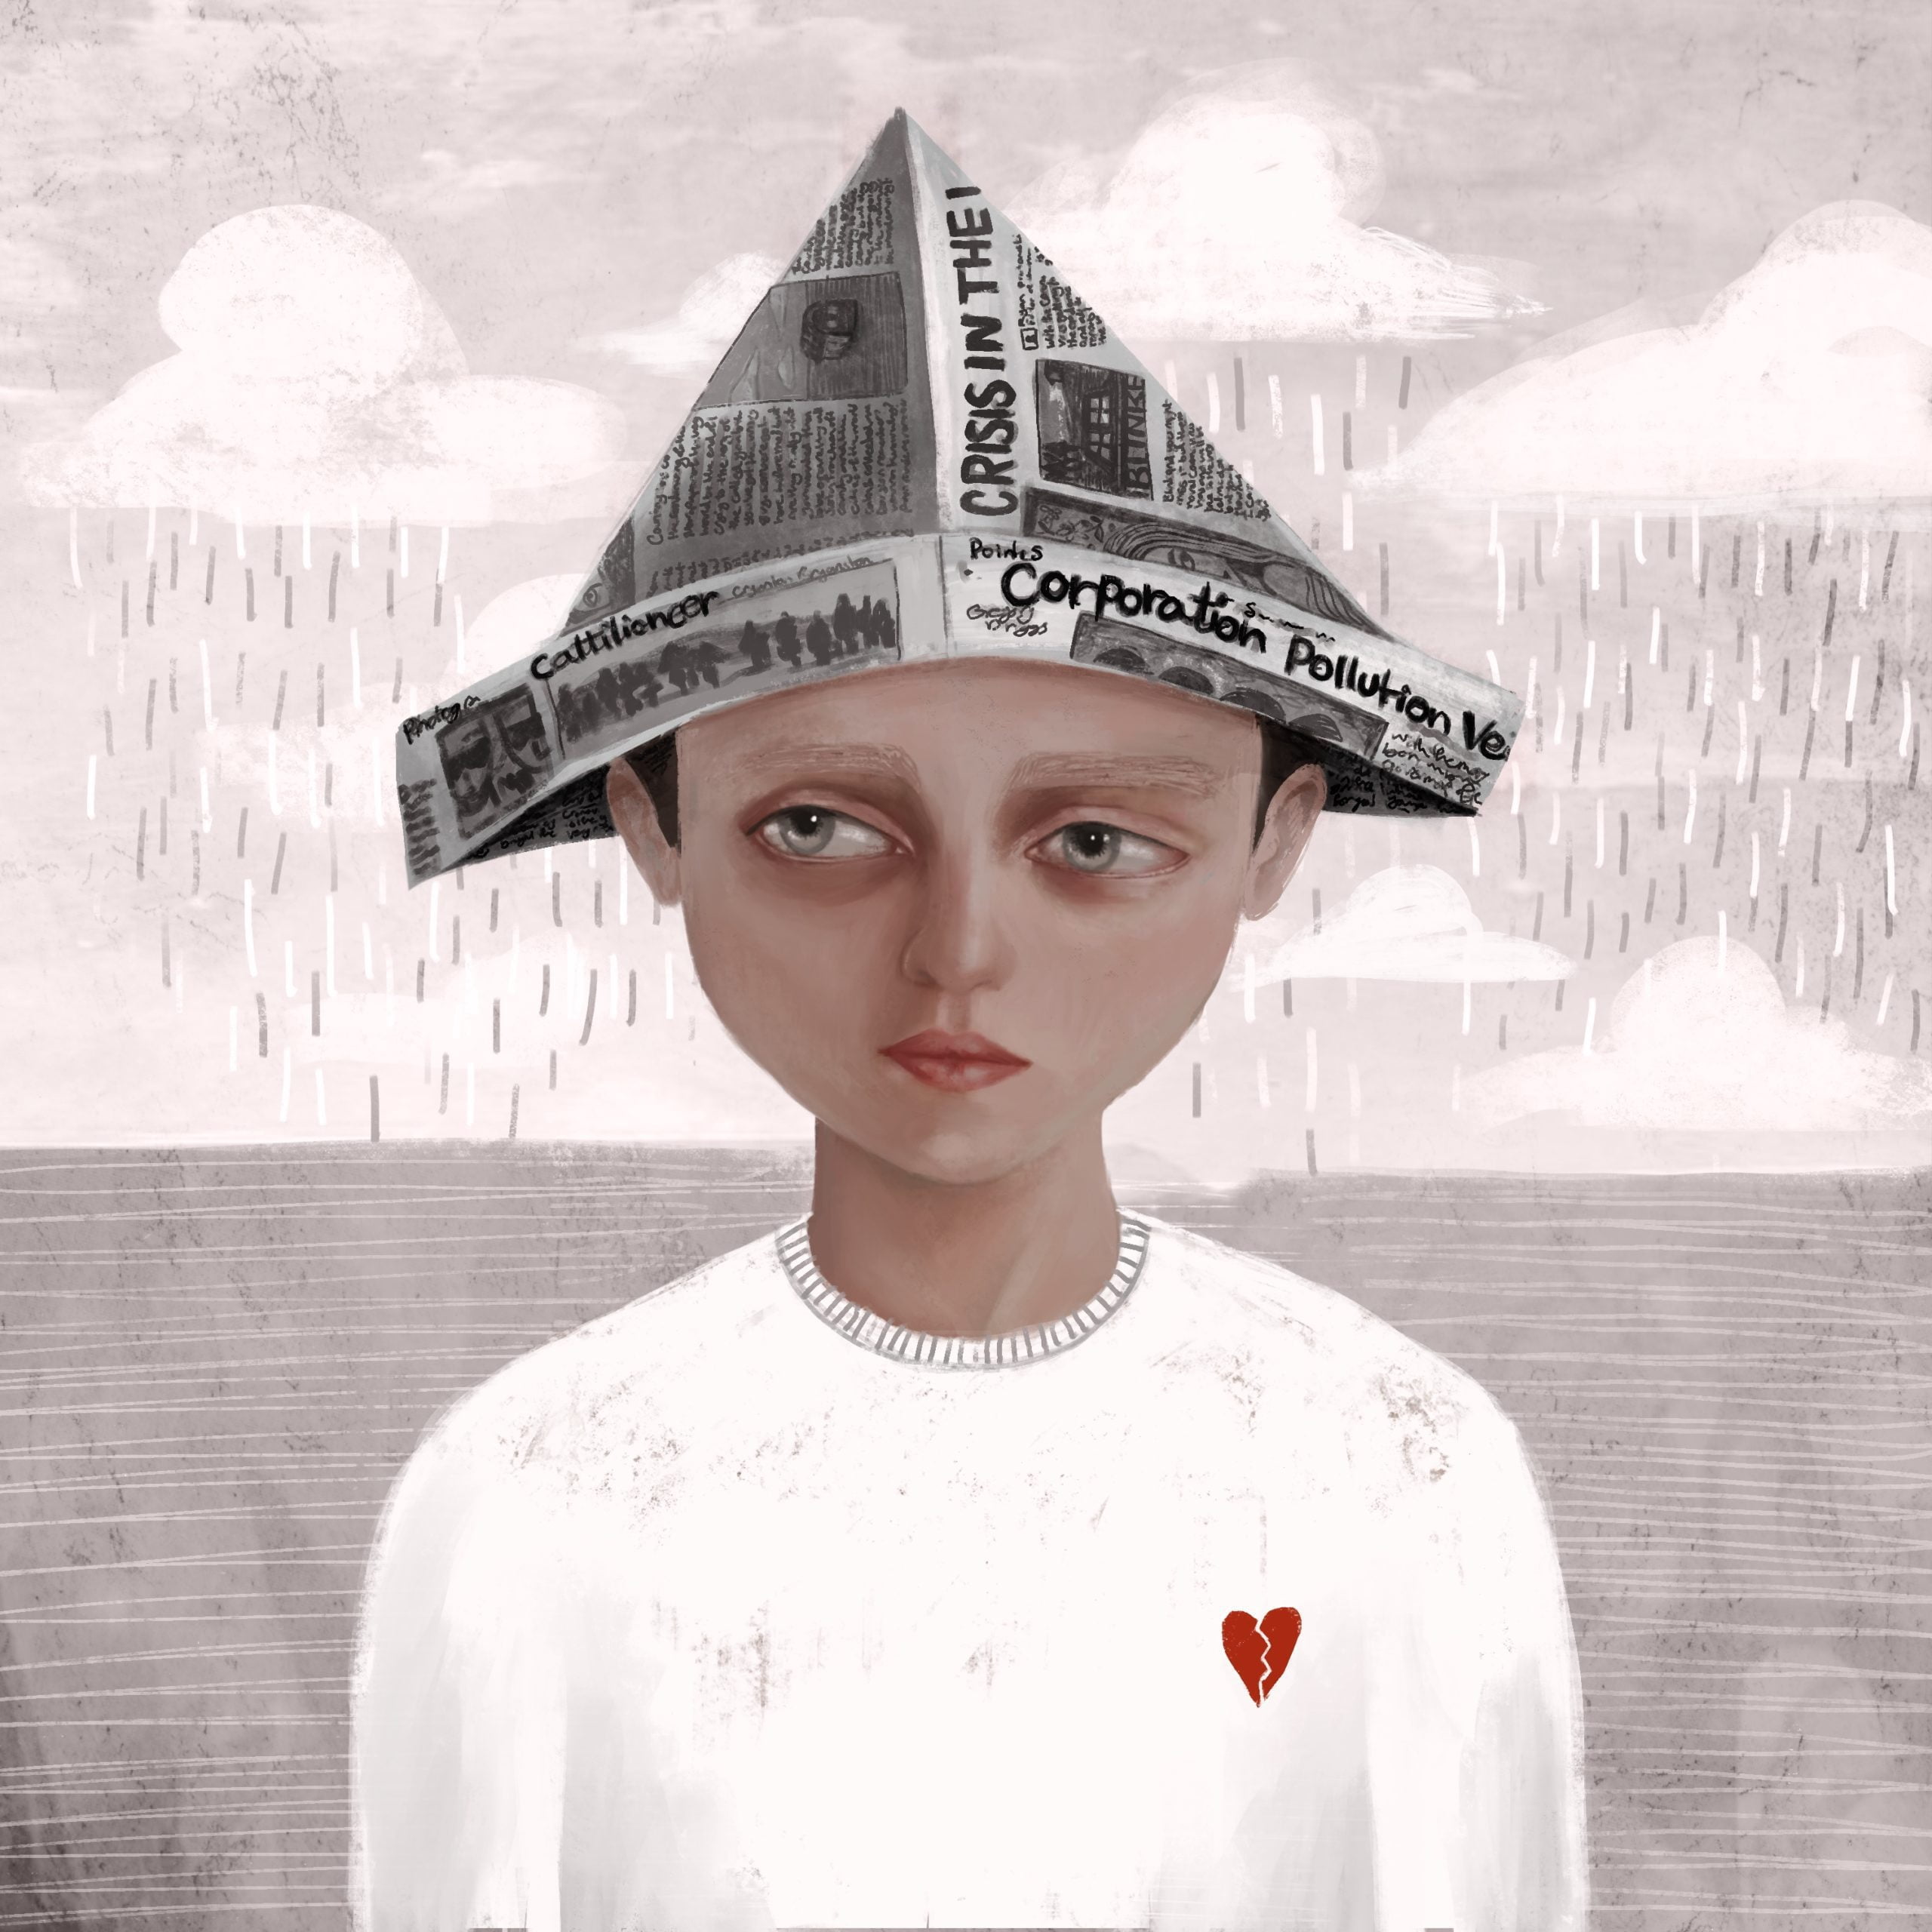 Crisis, Corporation, and Pollution headlined the young boy’s newspaper boat hat. His dull grey eyes, reflecting the rainy skies, were surrounded by dark circles of listlessness. The broken heart logo on his white sweater brightly contrasted the shades of gray beyond. The gritty texture of the landscapes reflected his own distress. His apparent boredom was undeterred by play time.